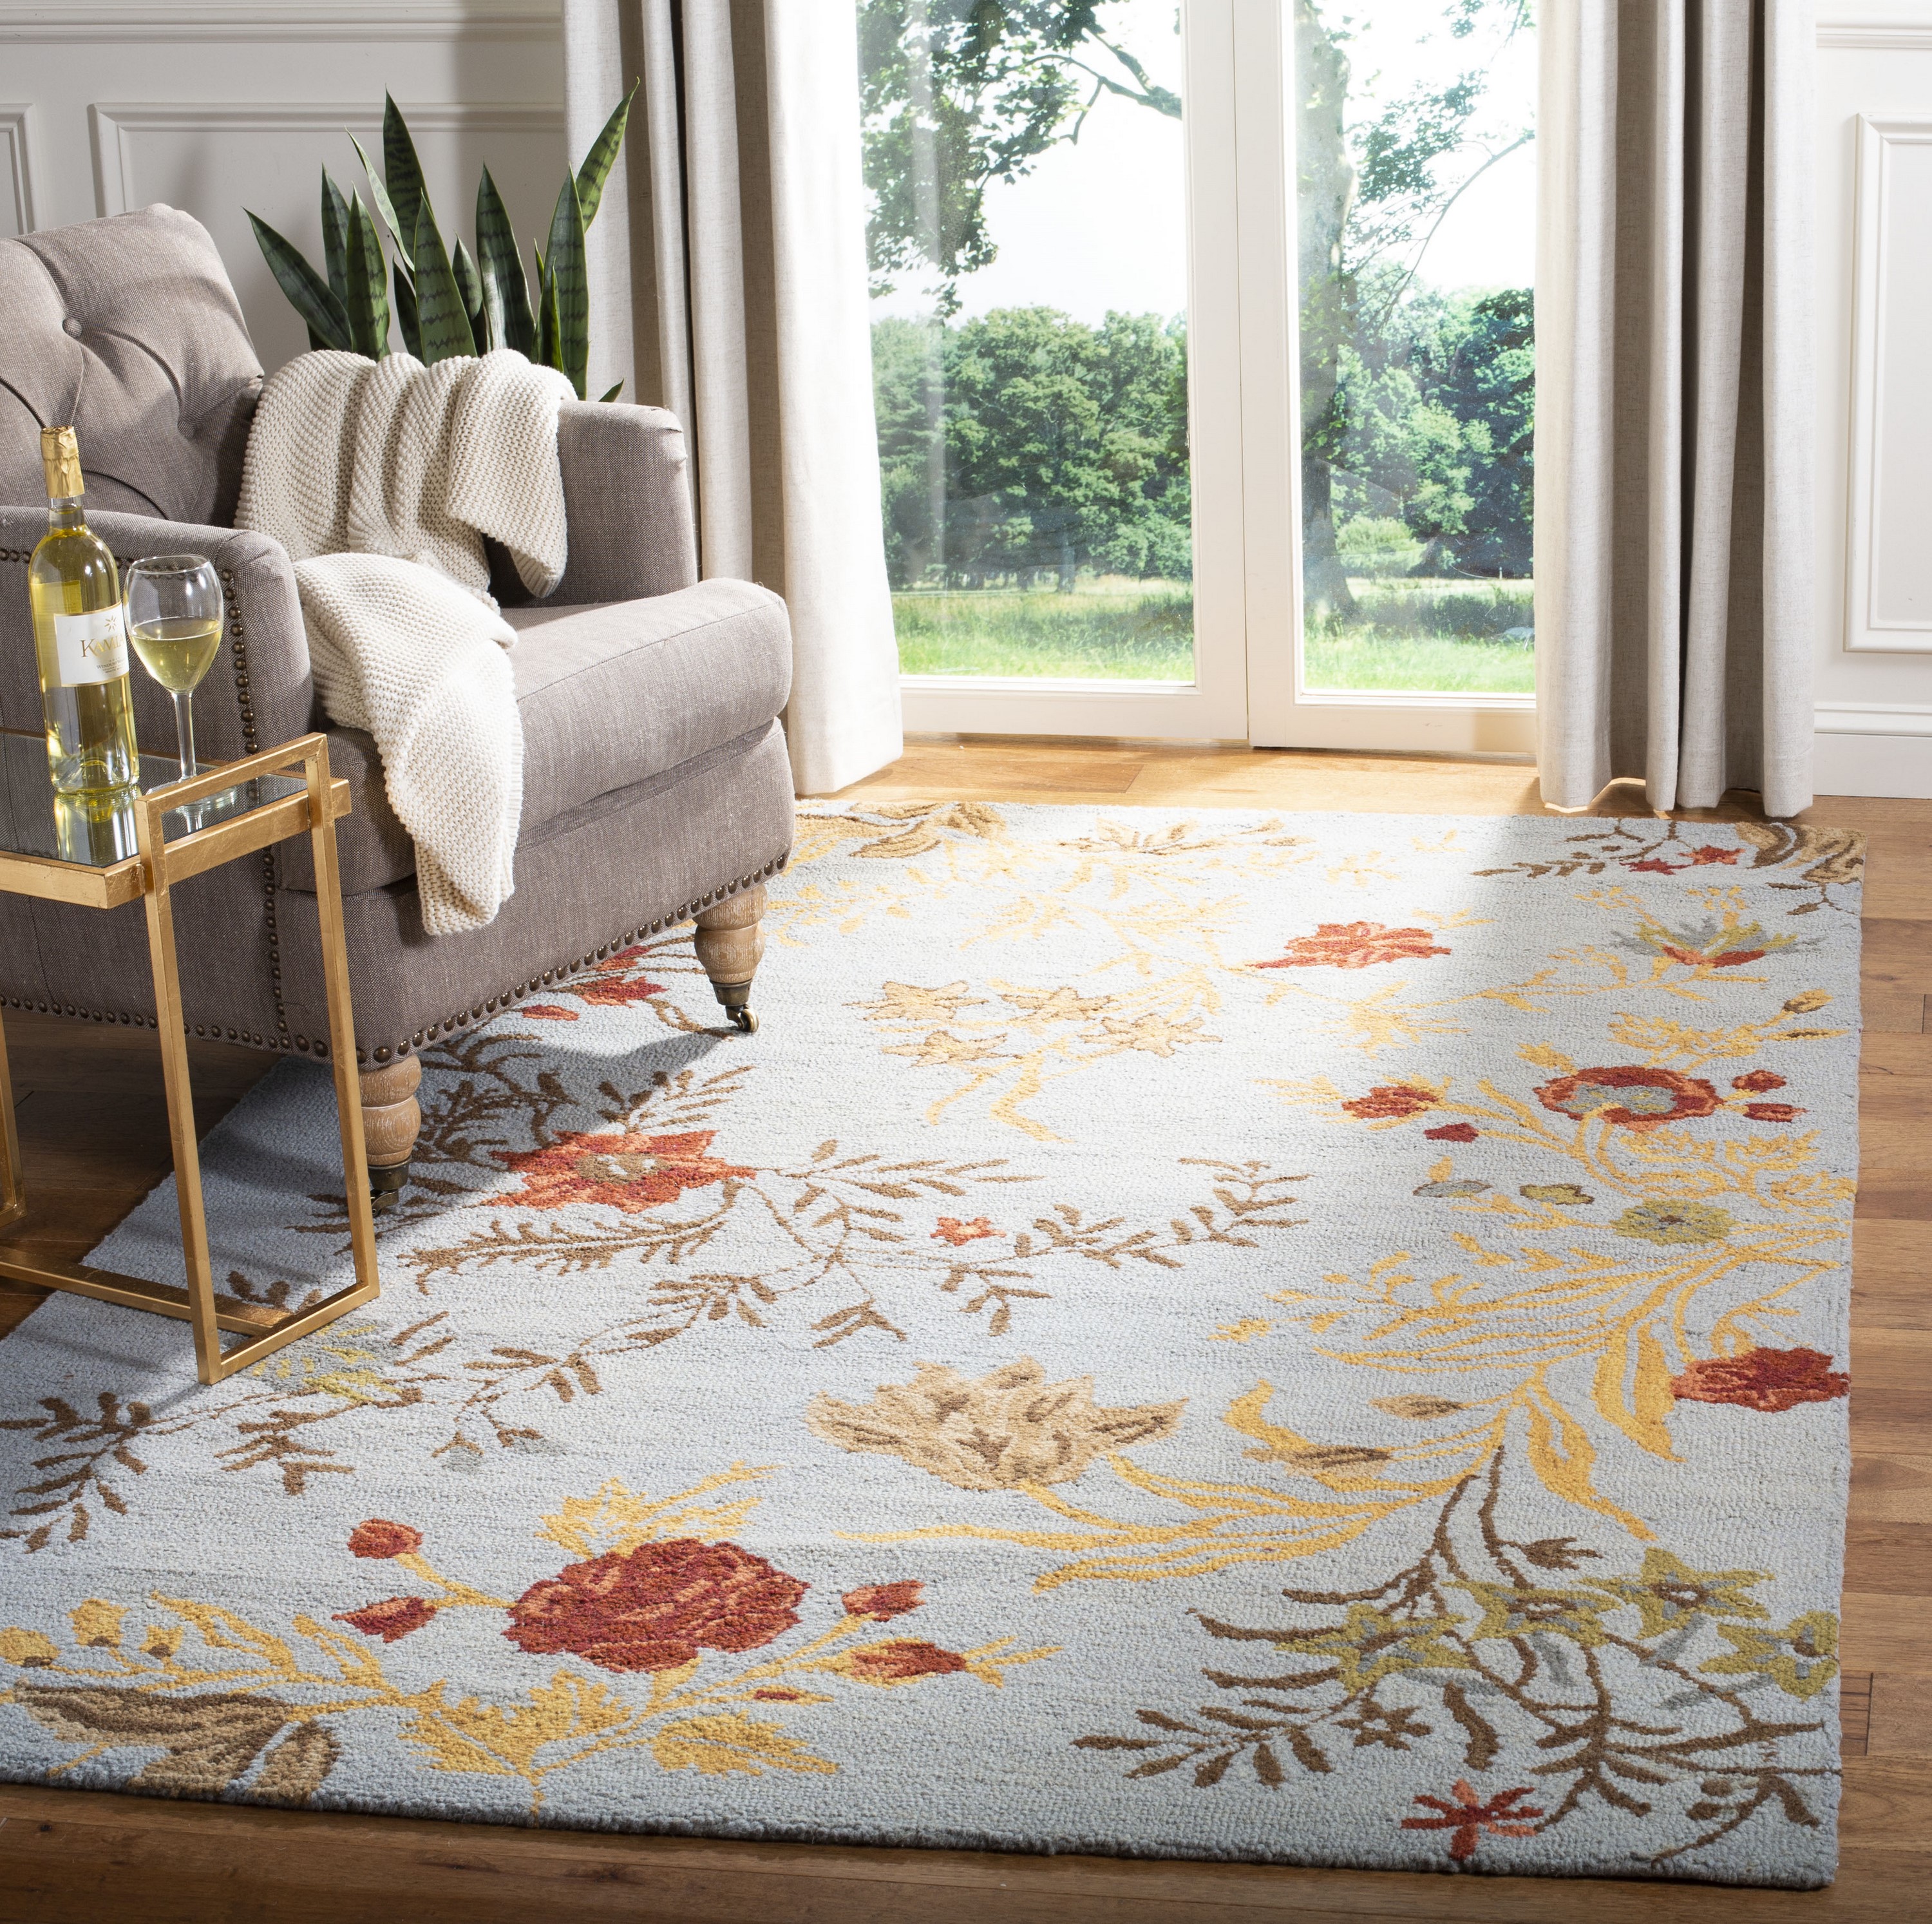 Wool Hooked Rugs at